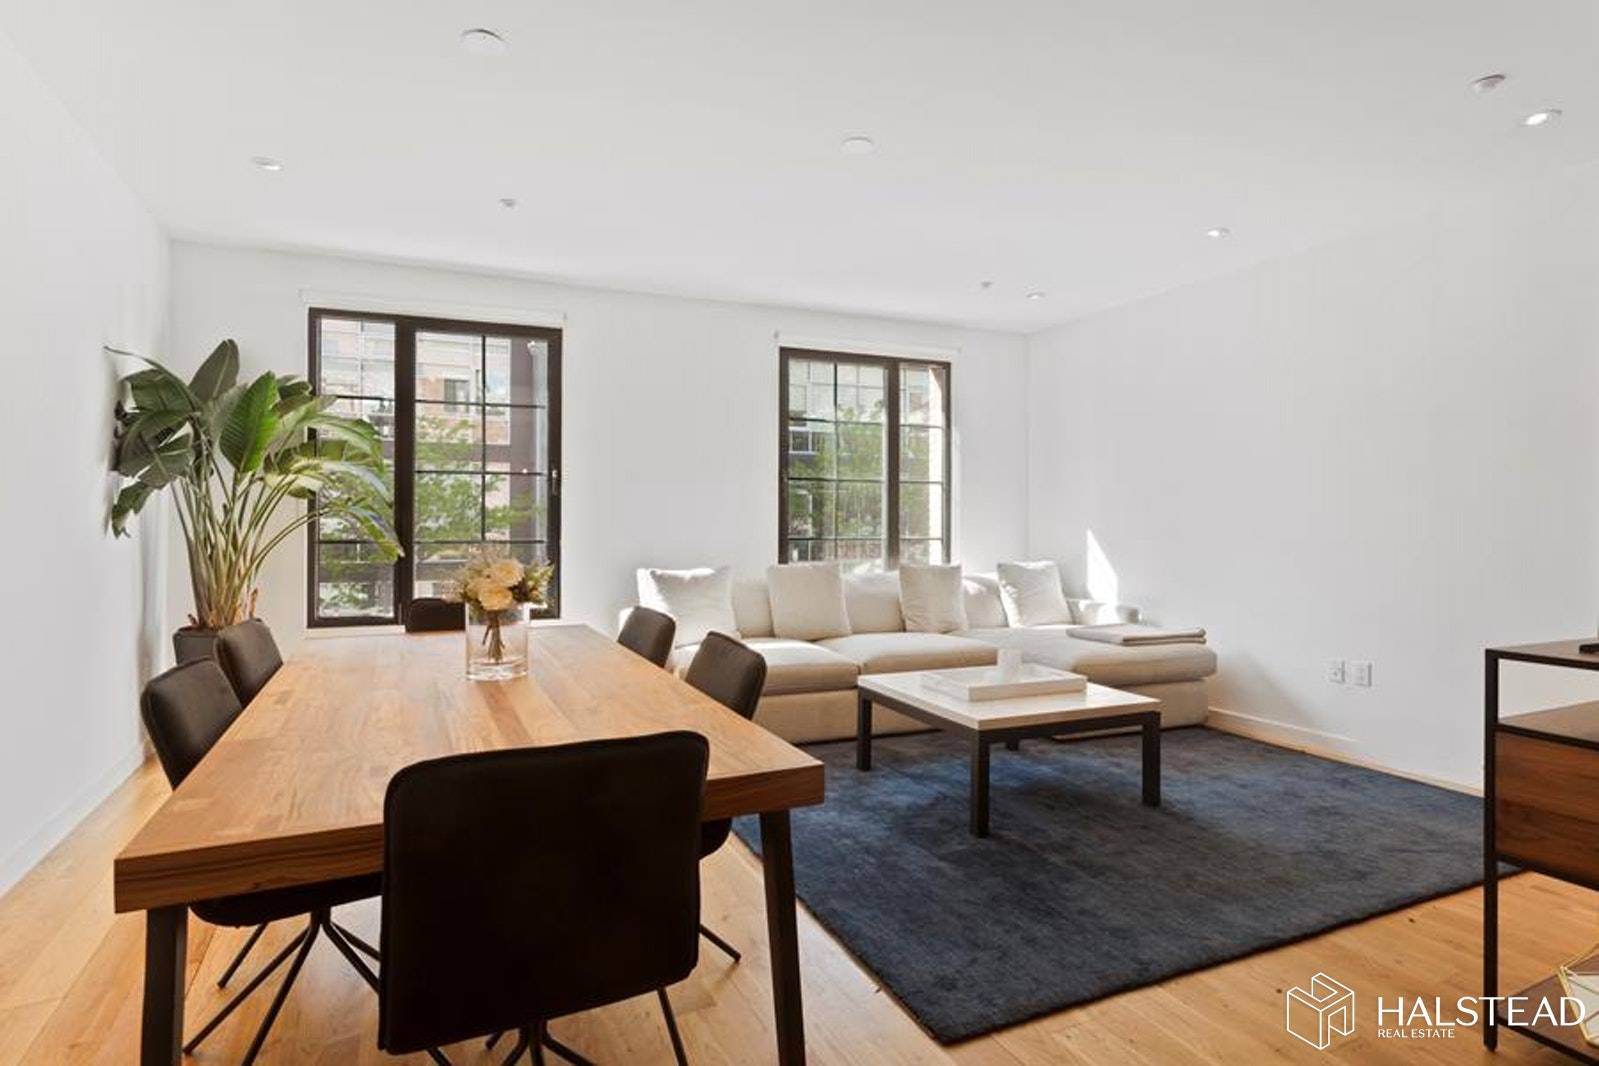 A stone's throw from waterfront Domino Park, this 2 bedroom, 2 bathroom home incorporates Williamsburg's coveted warehouse aesthetic with loft like layout, oversized windows and brick facade.